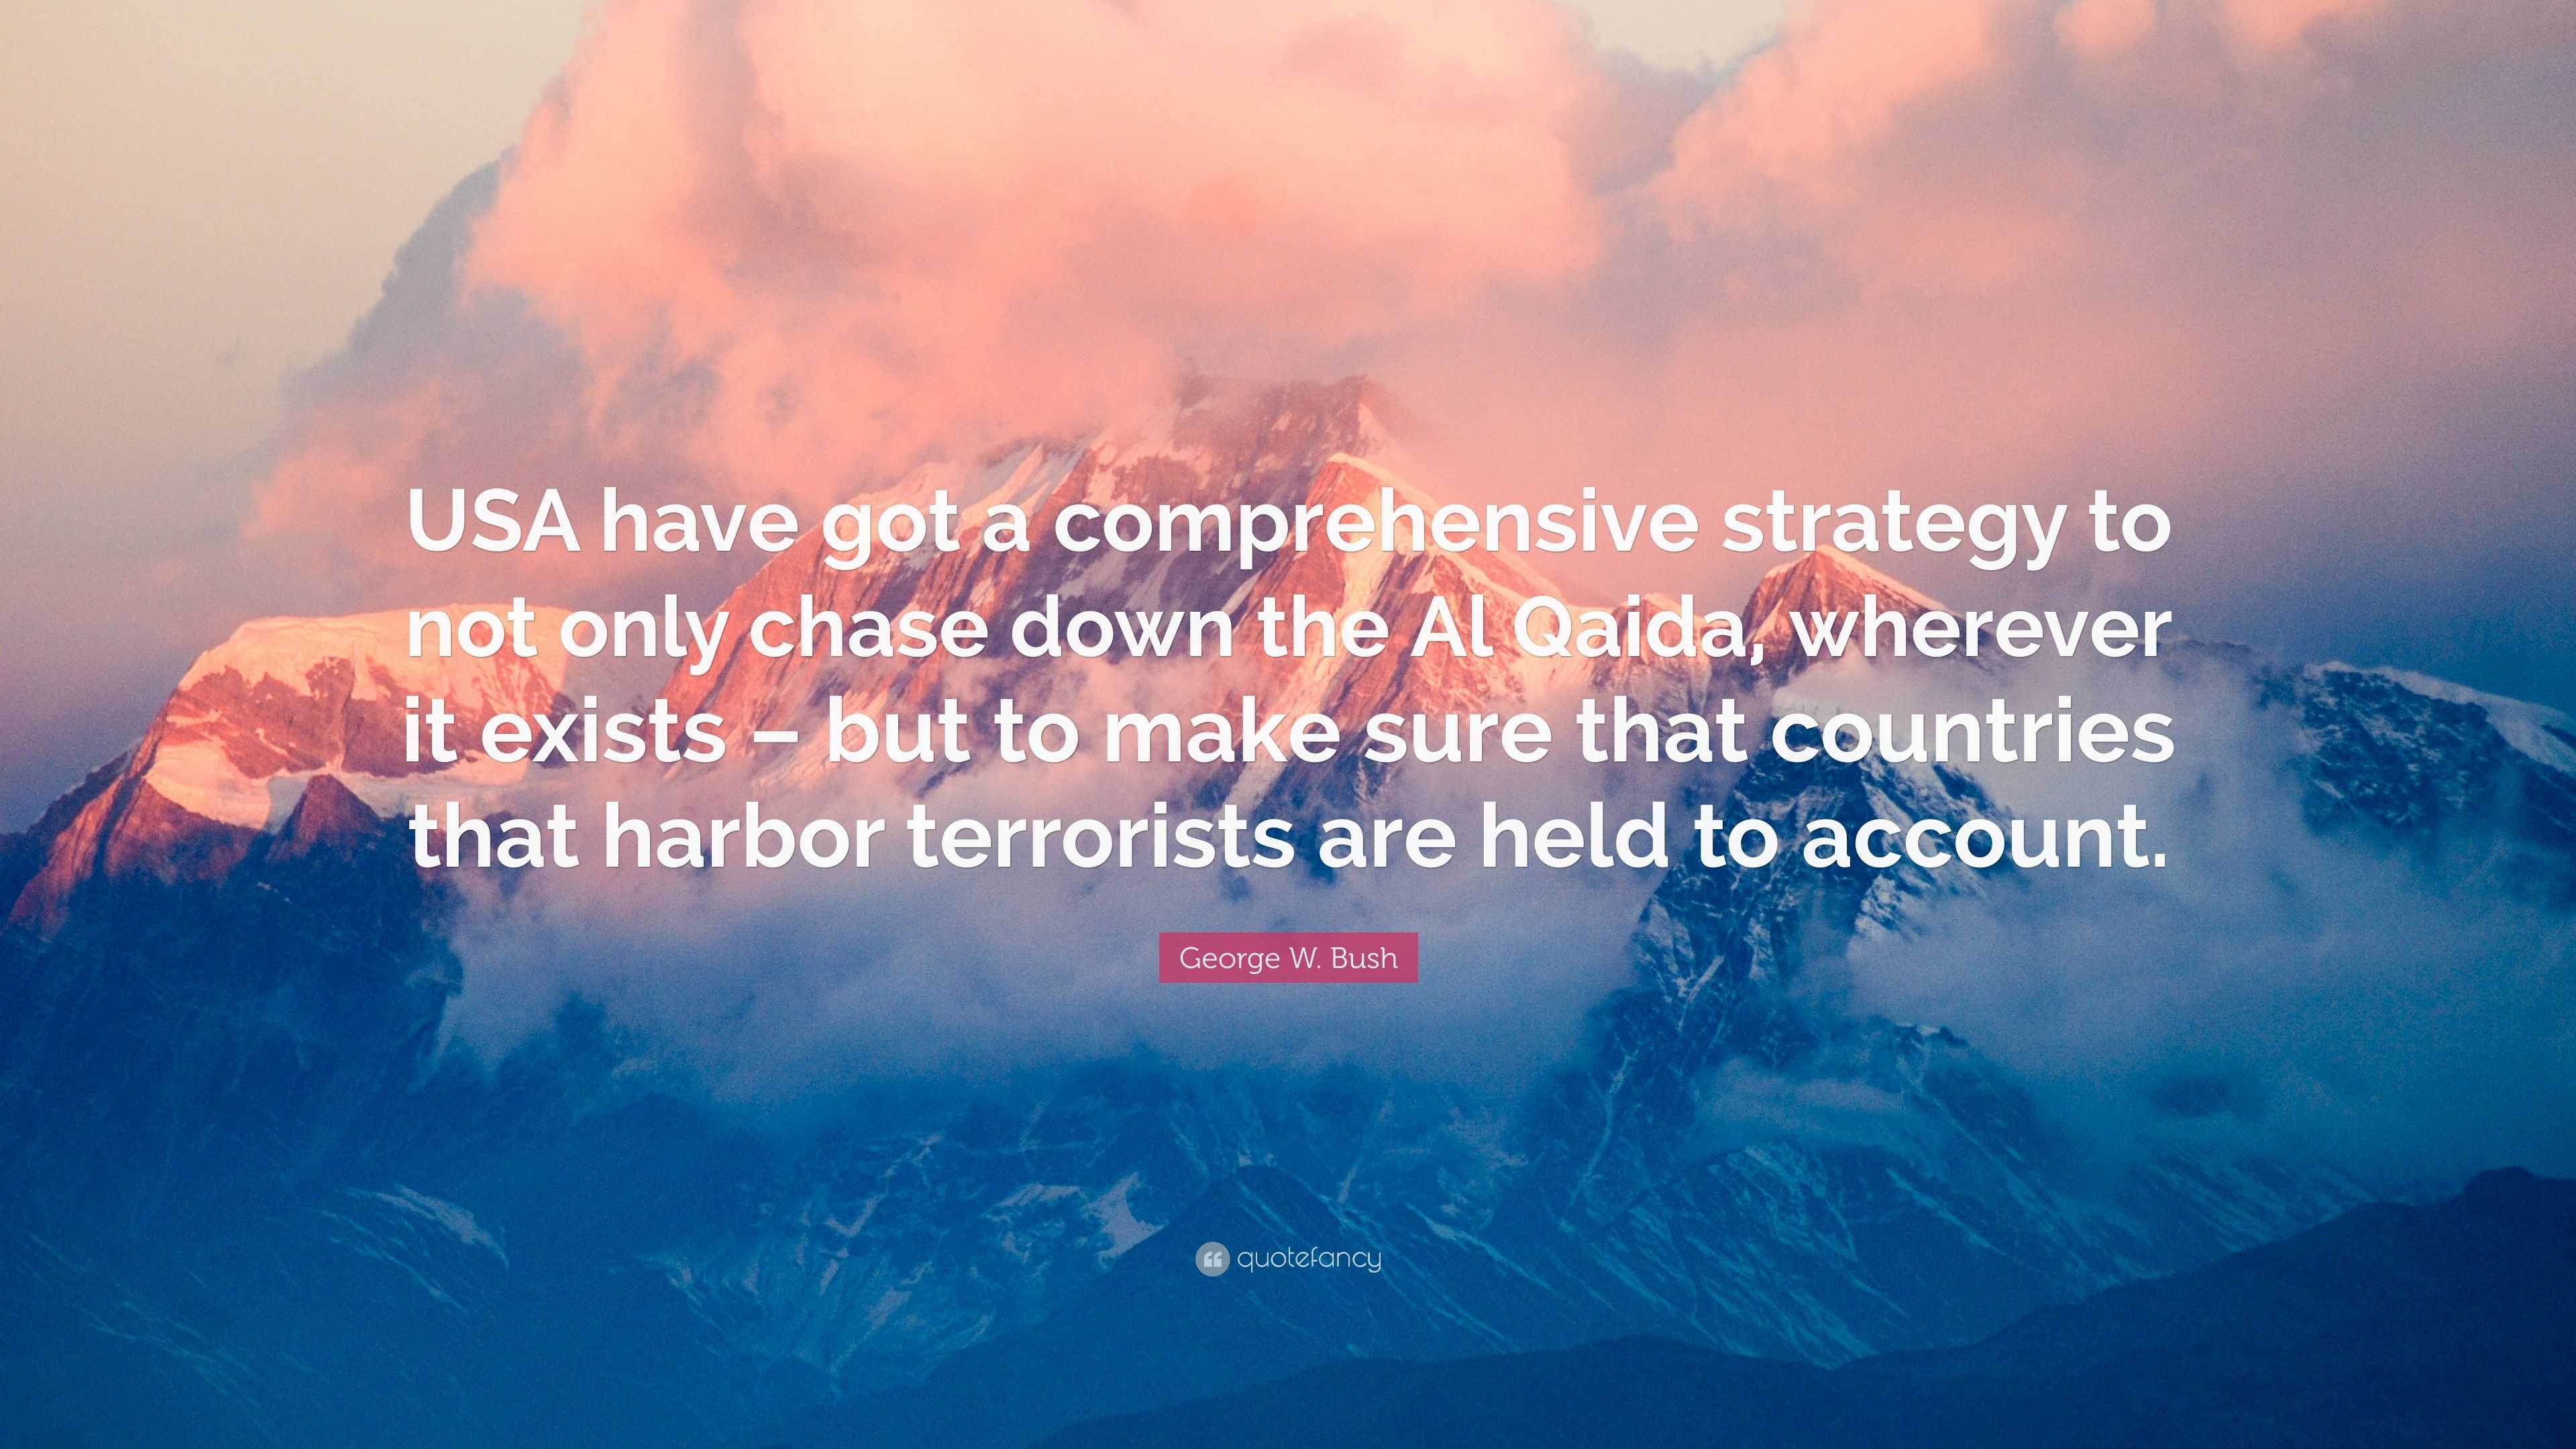 George W. Bush Quote: “USA have got a comprehensive strategy to not ...